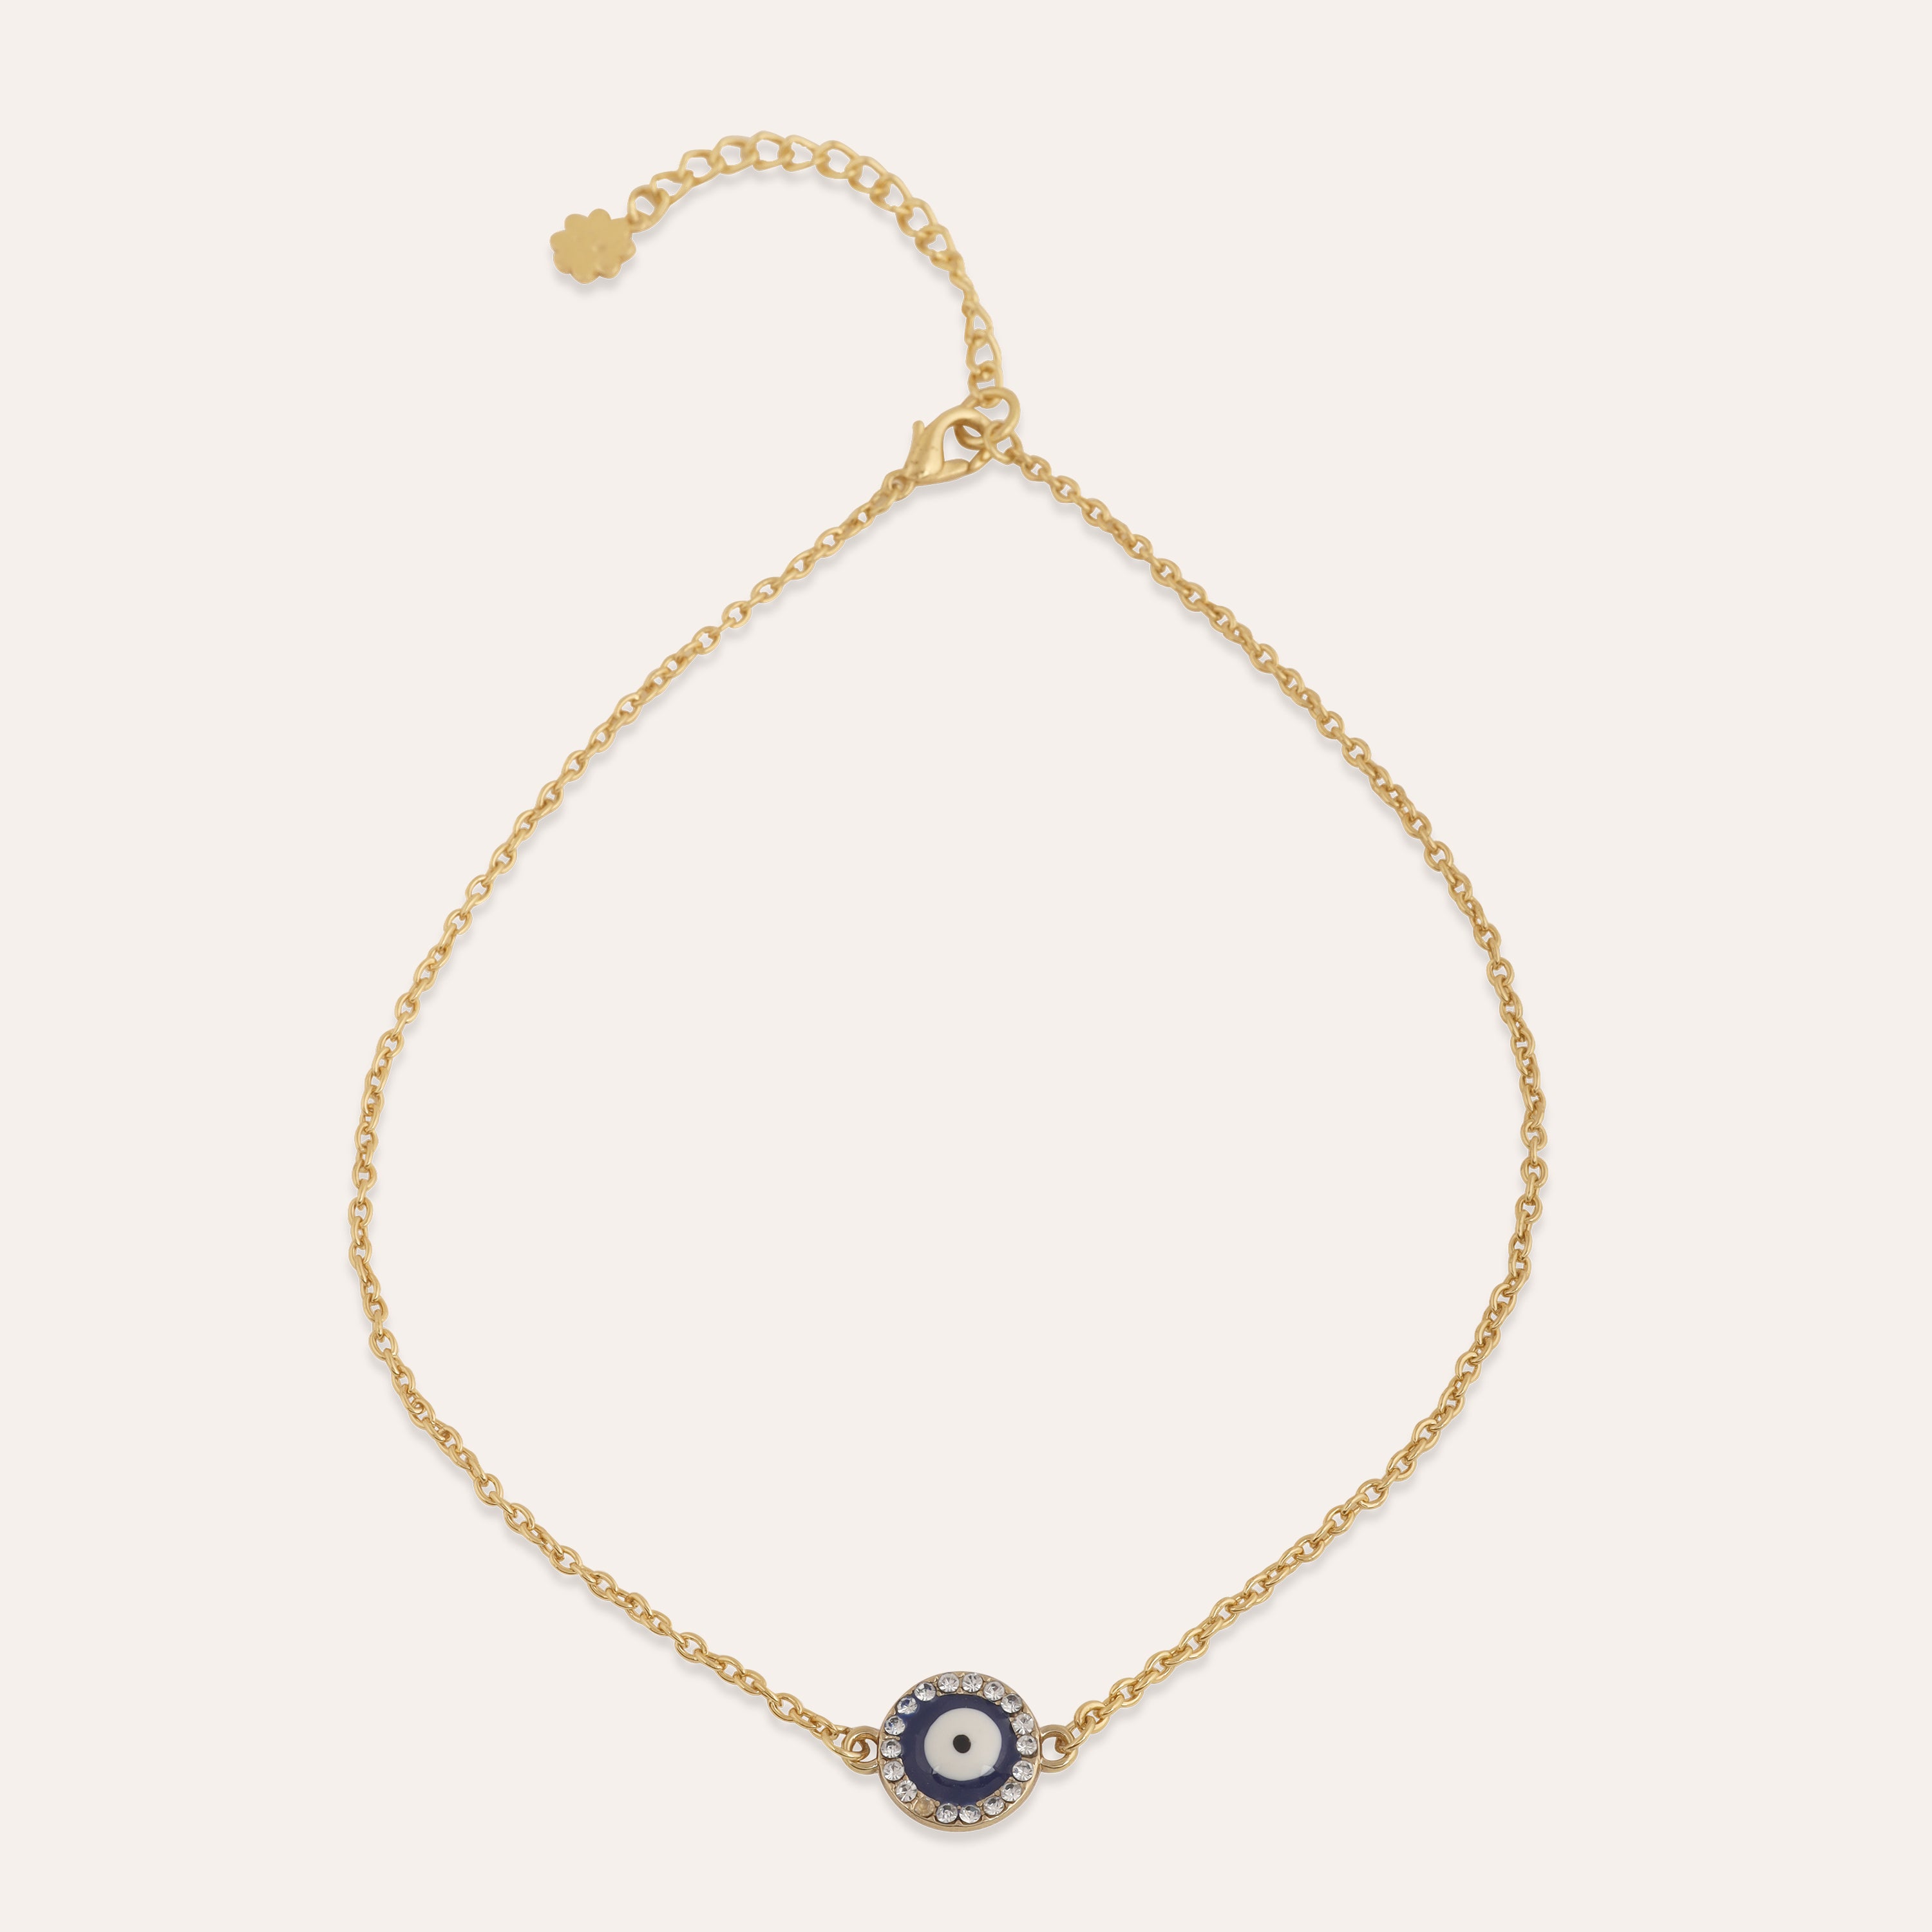 TFC Round Evil Eye Gold Plated Necklace-Enhance your elegance with our collection of gold-plated necklaces for women. Choose from stunning pendant necklaces, chic choker necklaces, and trendy layered necklaces. Our sleek and dainty designs are both affordable and anti-tarnish, ensuring lasting beauty. Enjoy the cheapest fashion jewellery, lightweight and stylish- only at The Fun Company